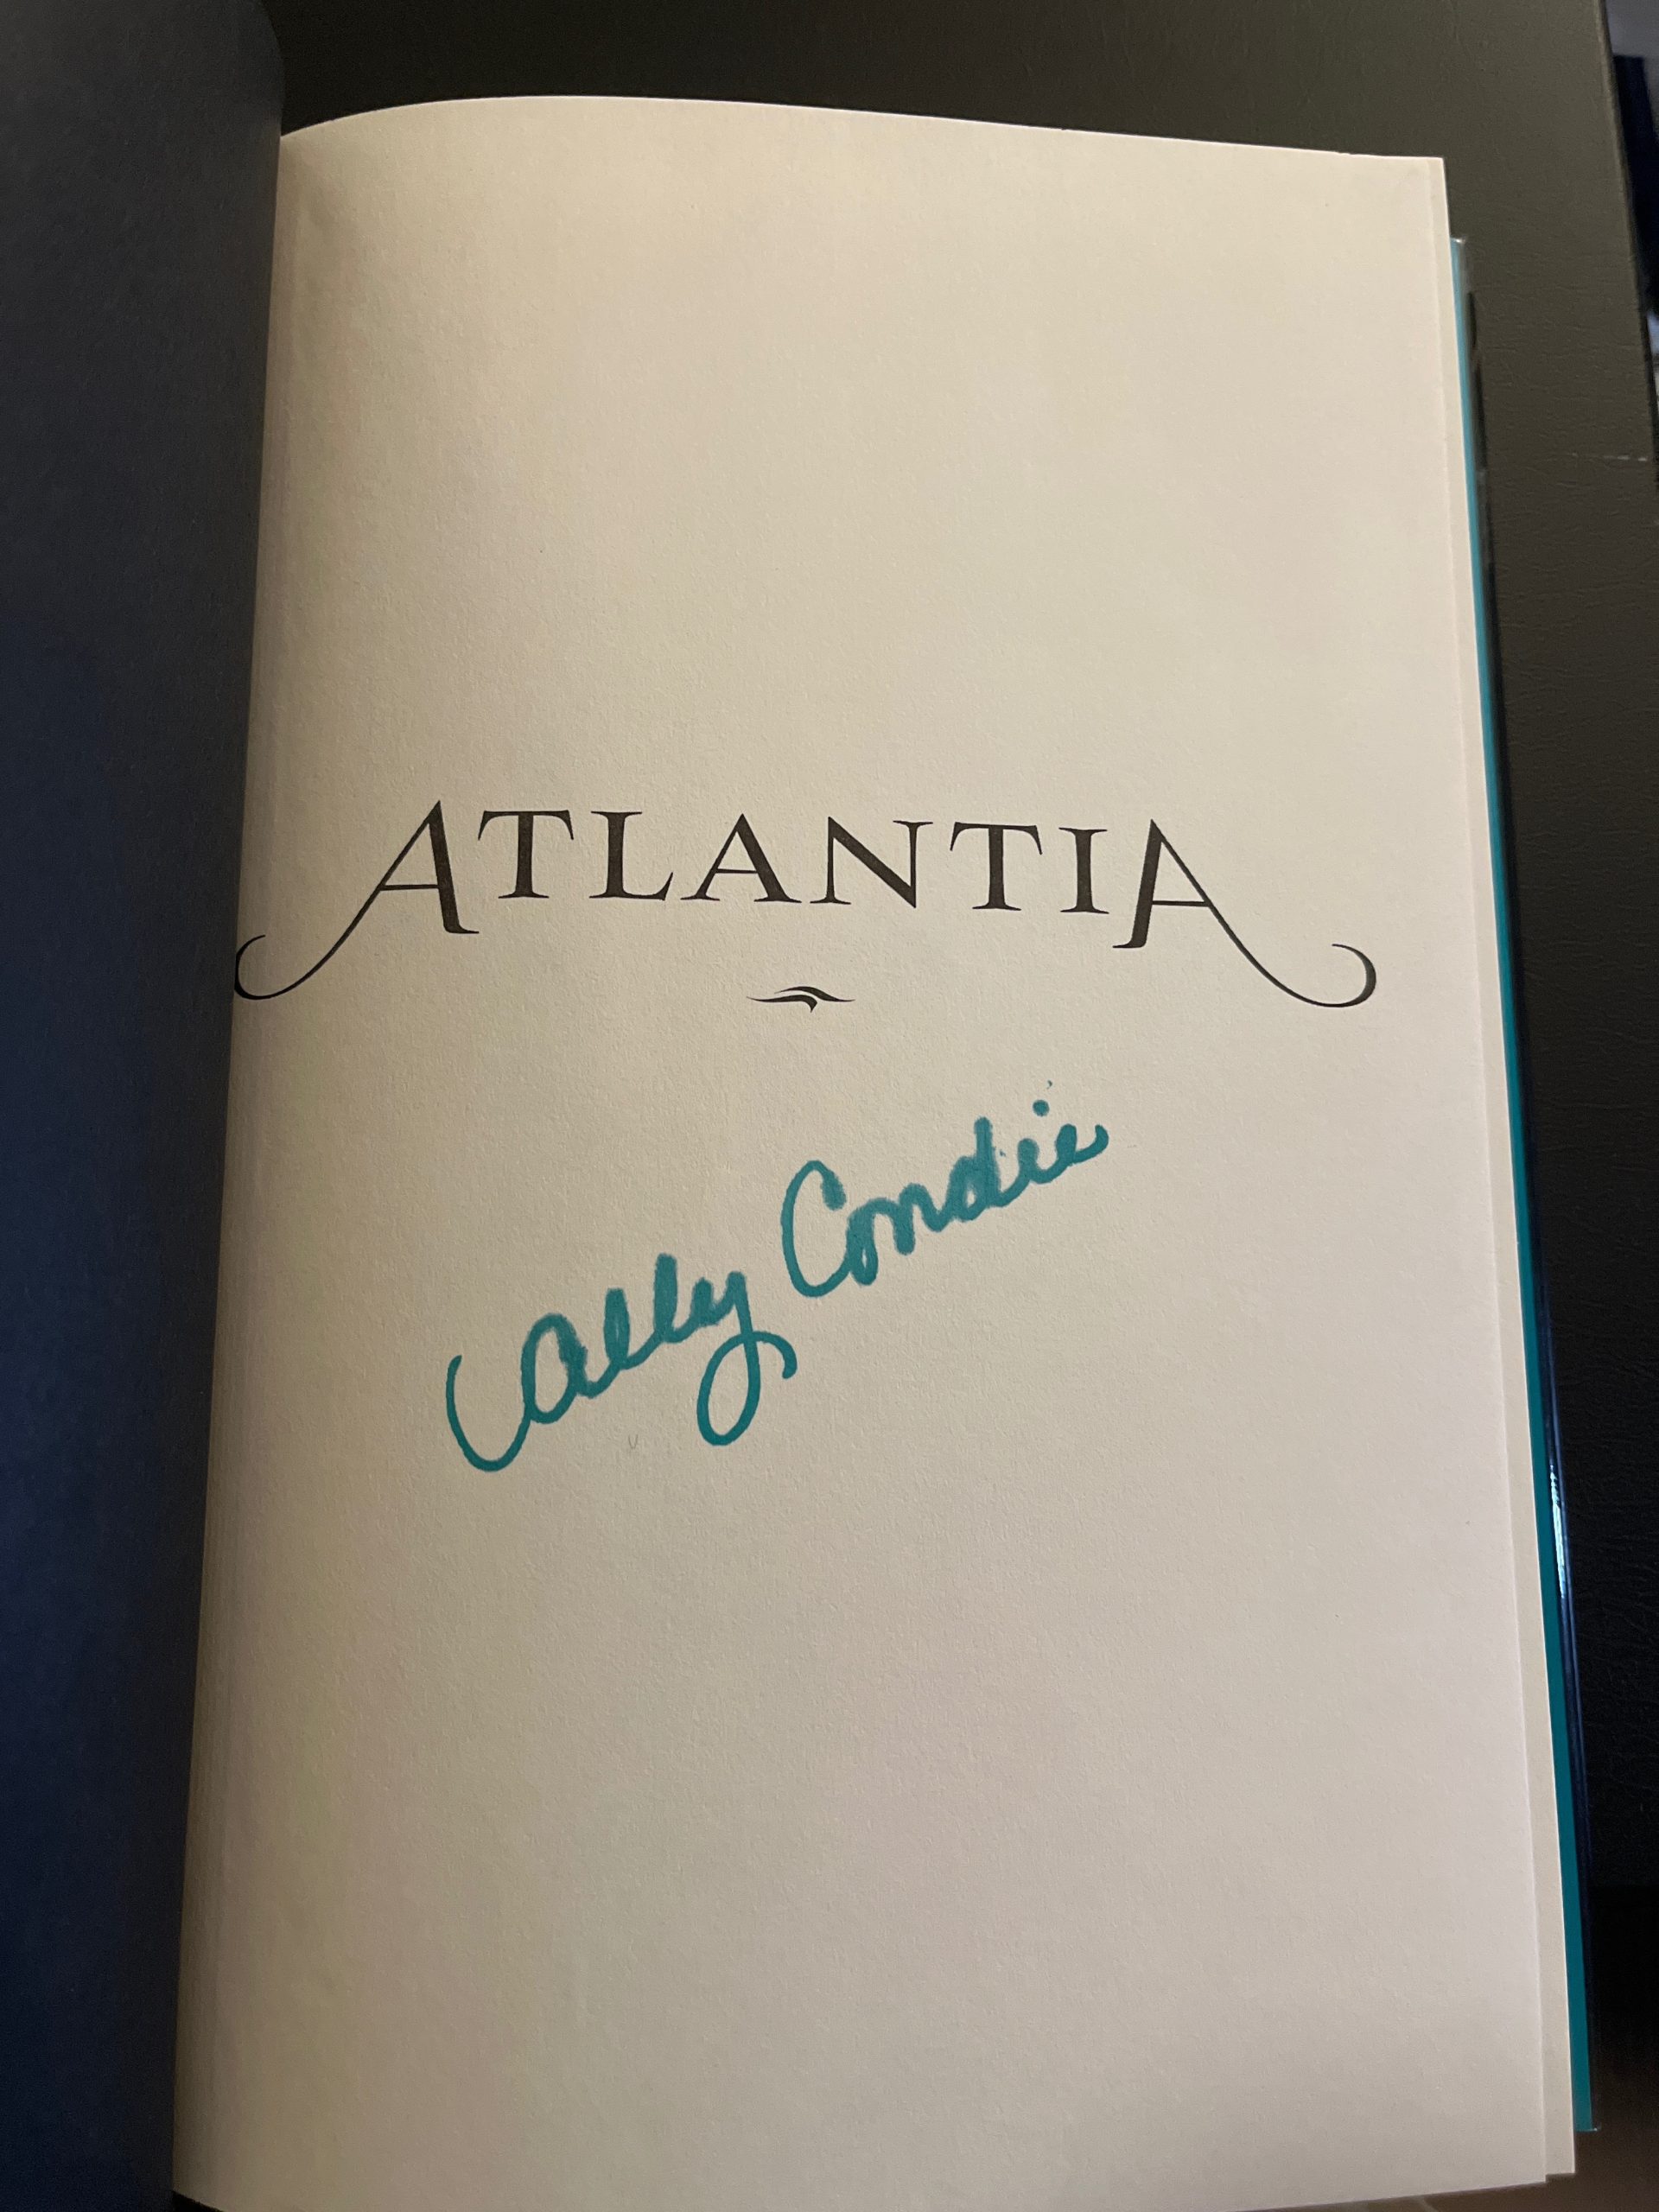 Atlantia by Ally Condie (signed)